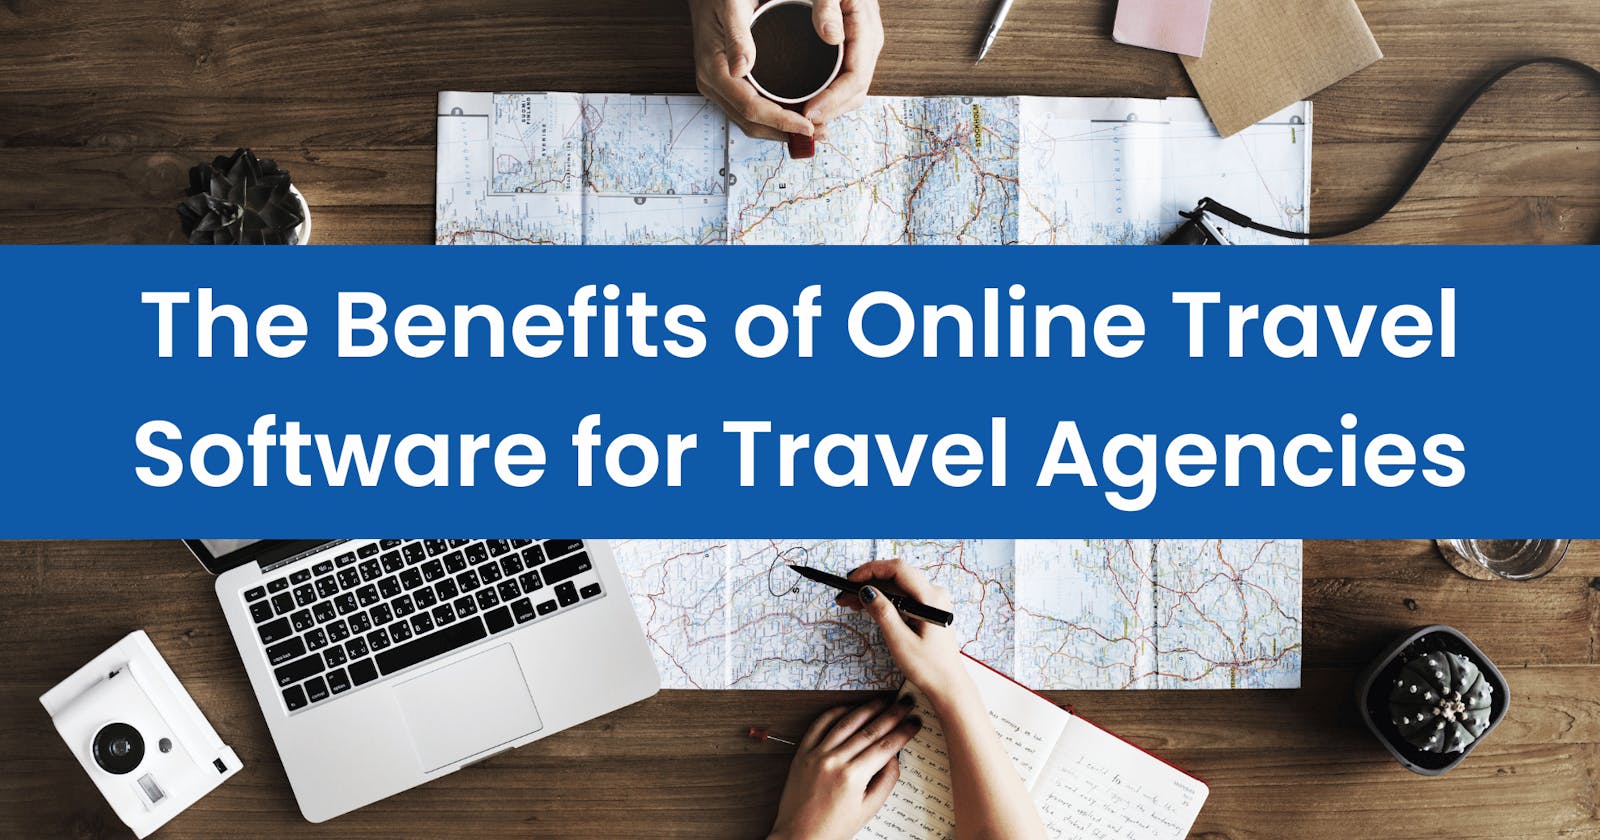 The Benefits of Online Travel Software for Travel Agencies